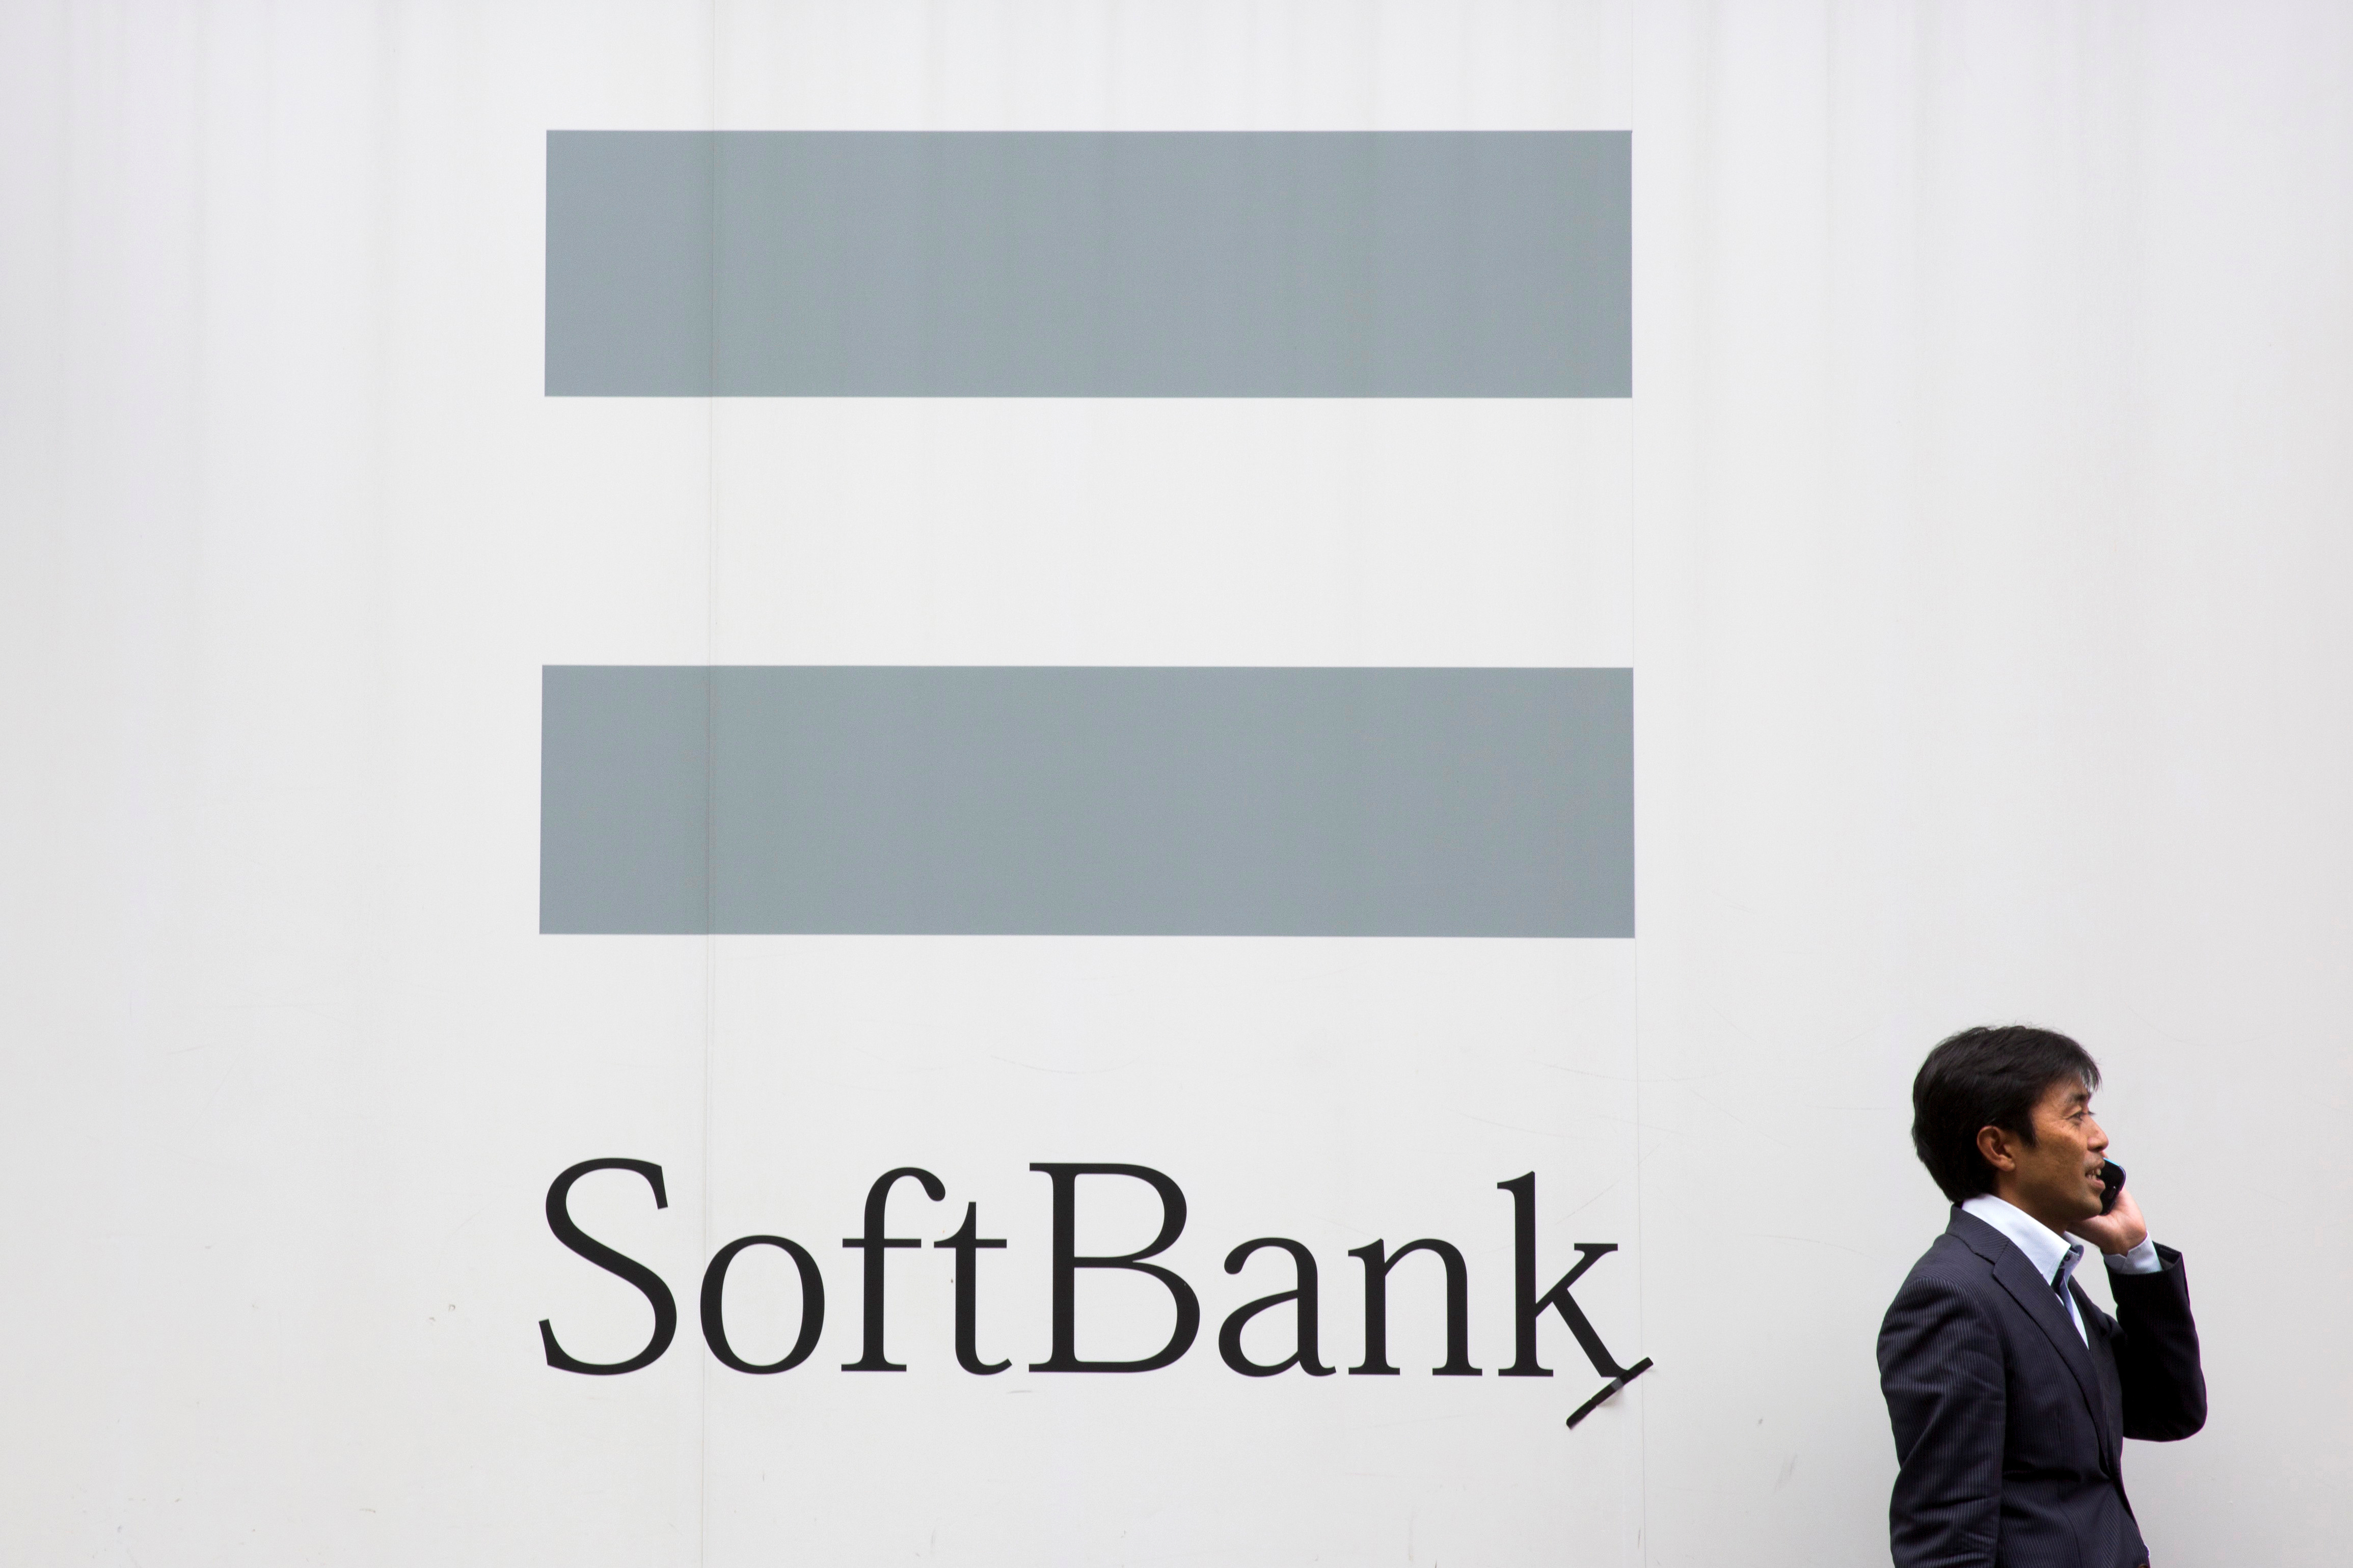 A man talks on the phone as he stand in front of an advertising poster of the SoftBank telecommunications company in Tokyo